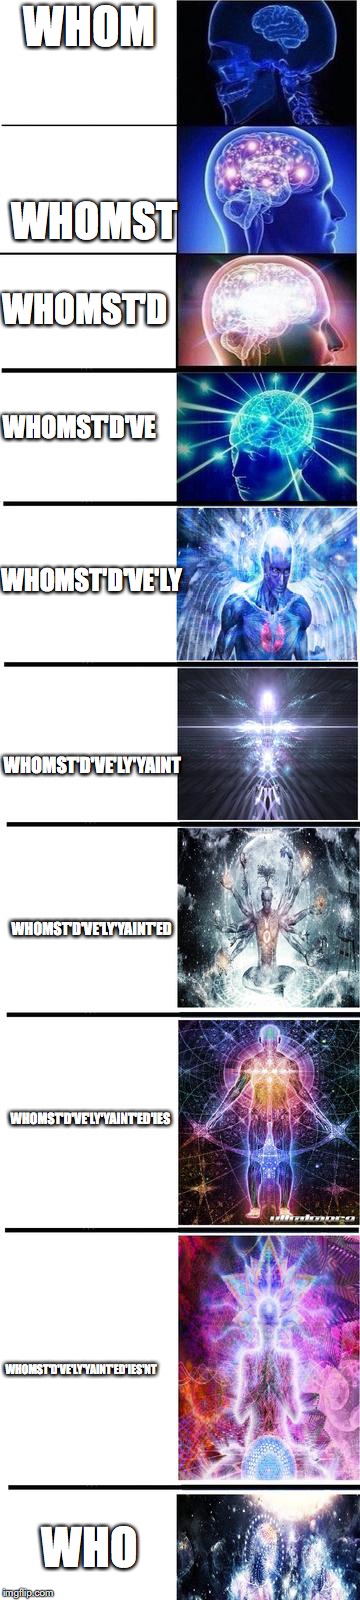 expanding brain | WHOM; WHOMST; WHOMST'D; WHOMST'D'VE; WHOMST'D'VE'LY; WHOMST'D'VE'LY'YAINT; WHOMST'D'VE'LY'YAINT'ED; WHOMST'D'VE'LY'YAINT'ED'IES; WHOMST'D'VE'LY'YAINT'ED'IES'NT; WHO | image tagged in expanding brain | made w/ Imgflip meme maker